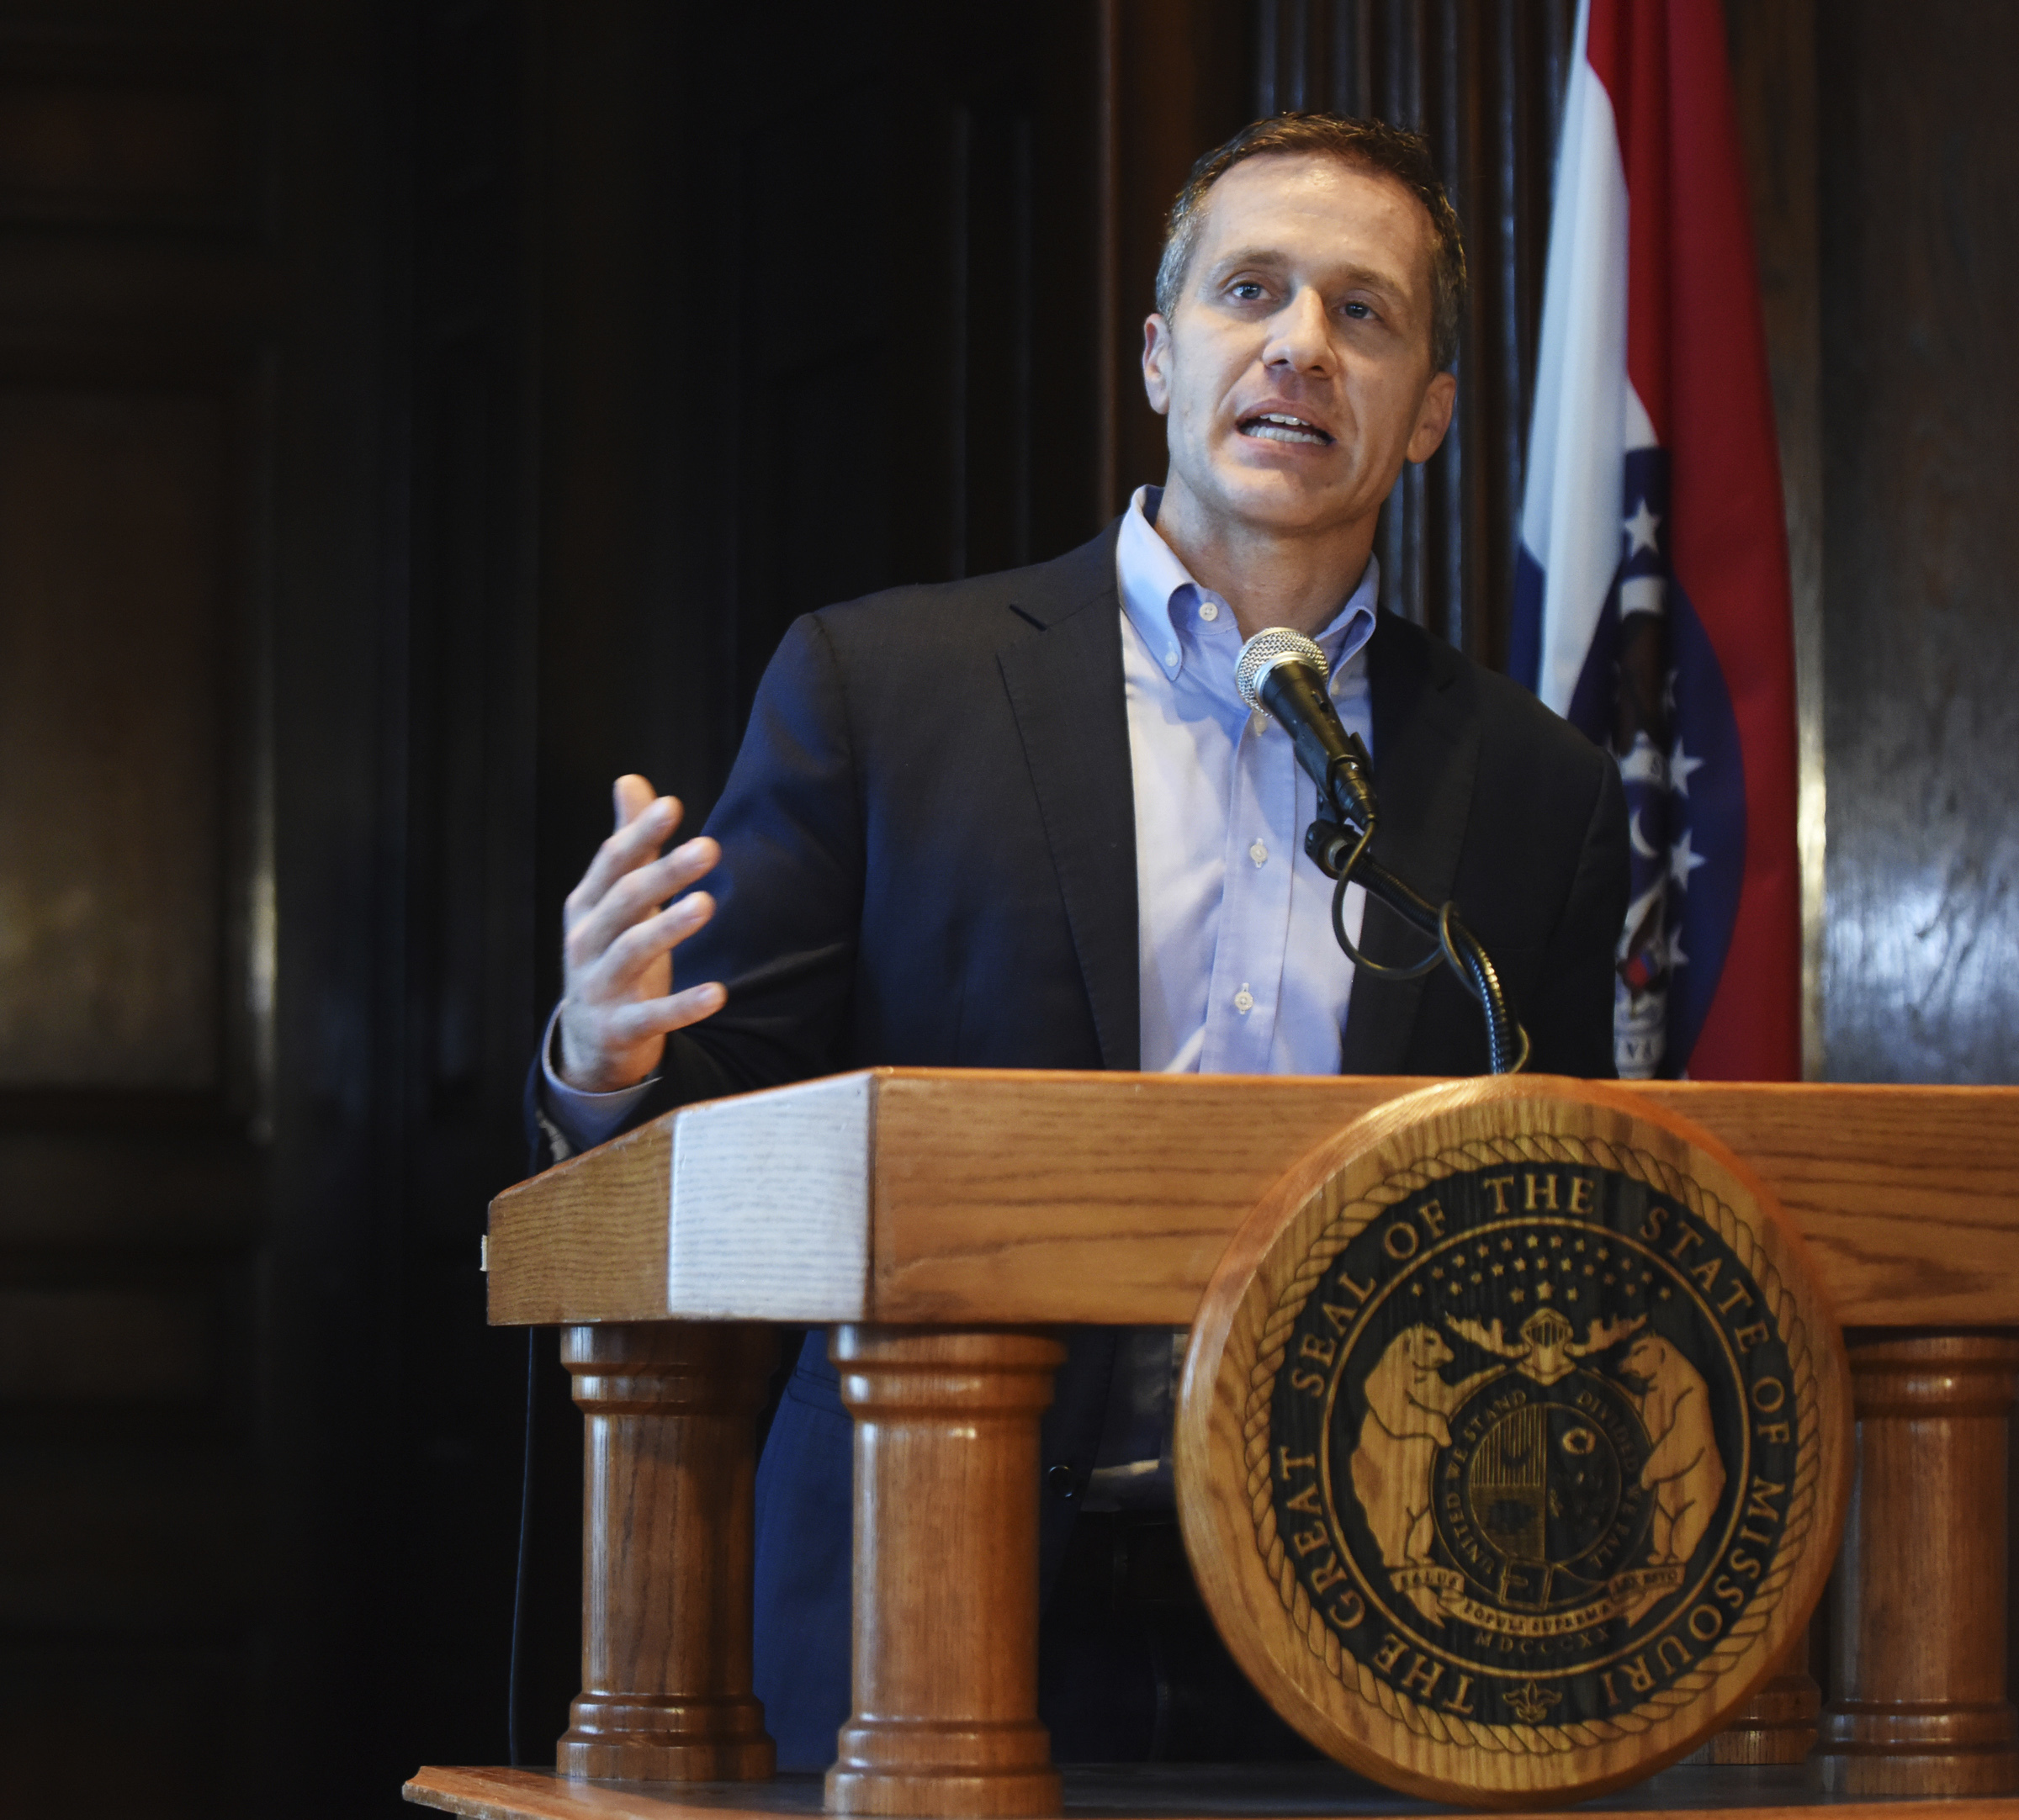 PHOTO: Missouri Gov. Eric Greitens speaks at a news conference in Jefferson City, Mo., April 11, 2018, about allegations related to an extramarital affair with his hairdresser.